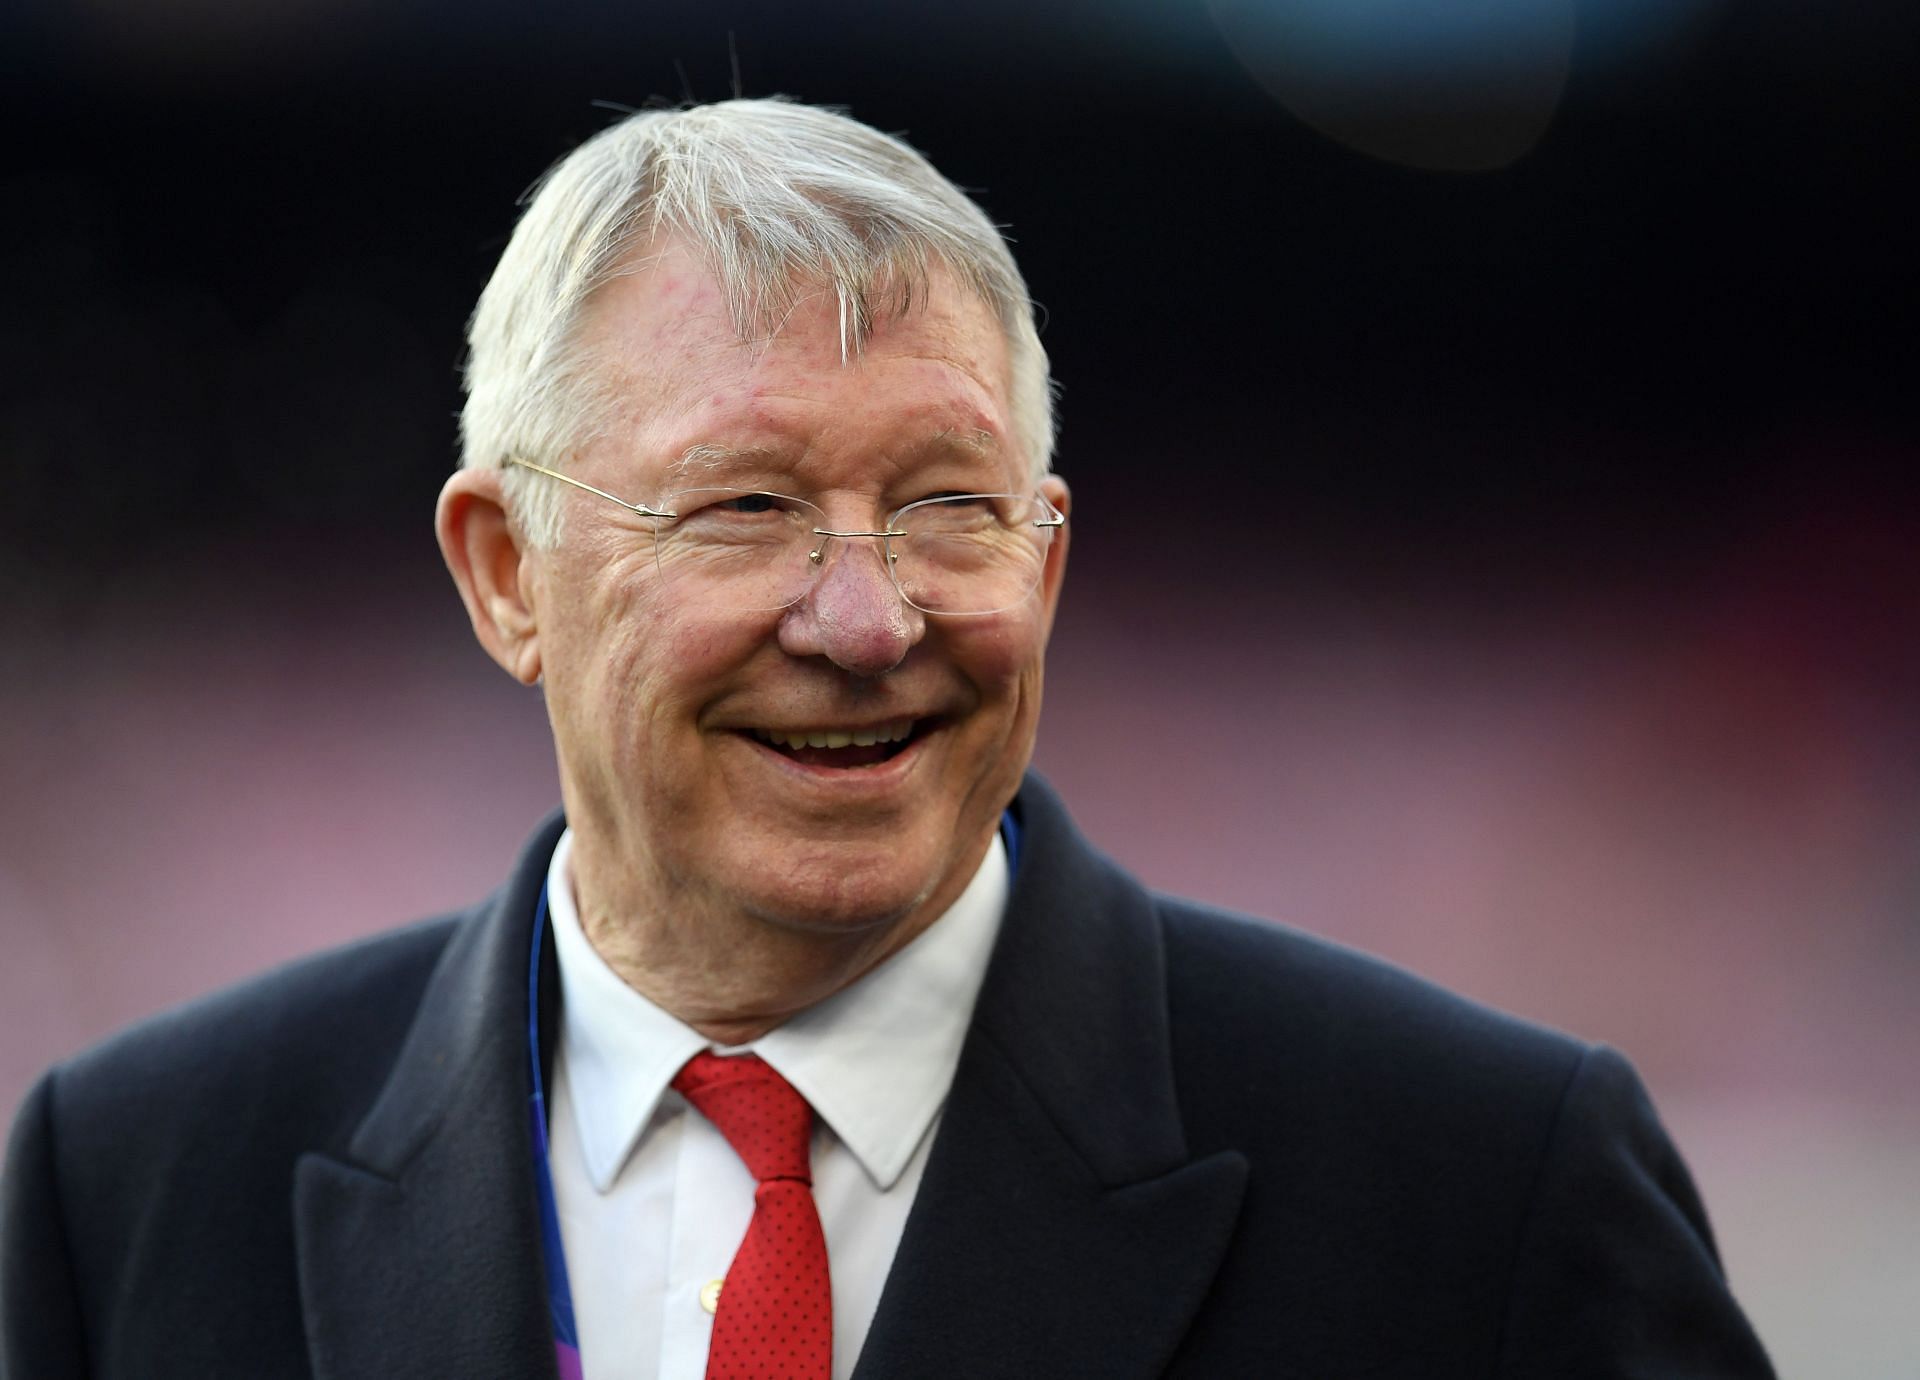 Sir Alex Ferguson is arguably the most recent elite British manager football has seen.